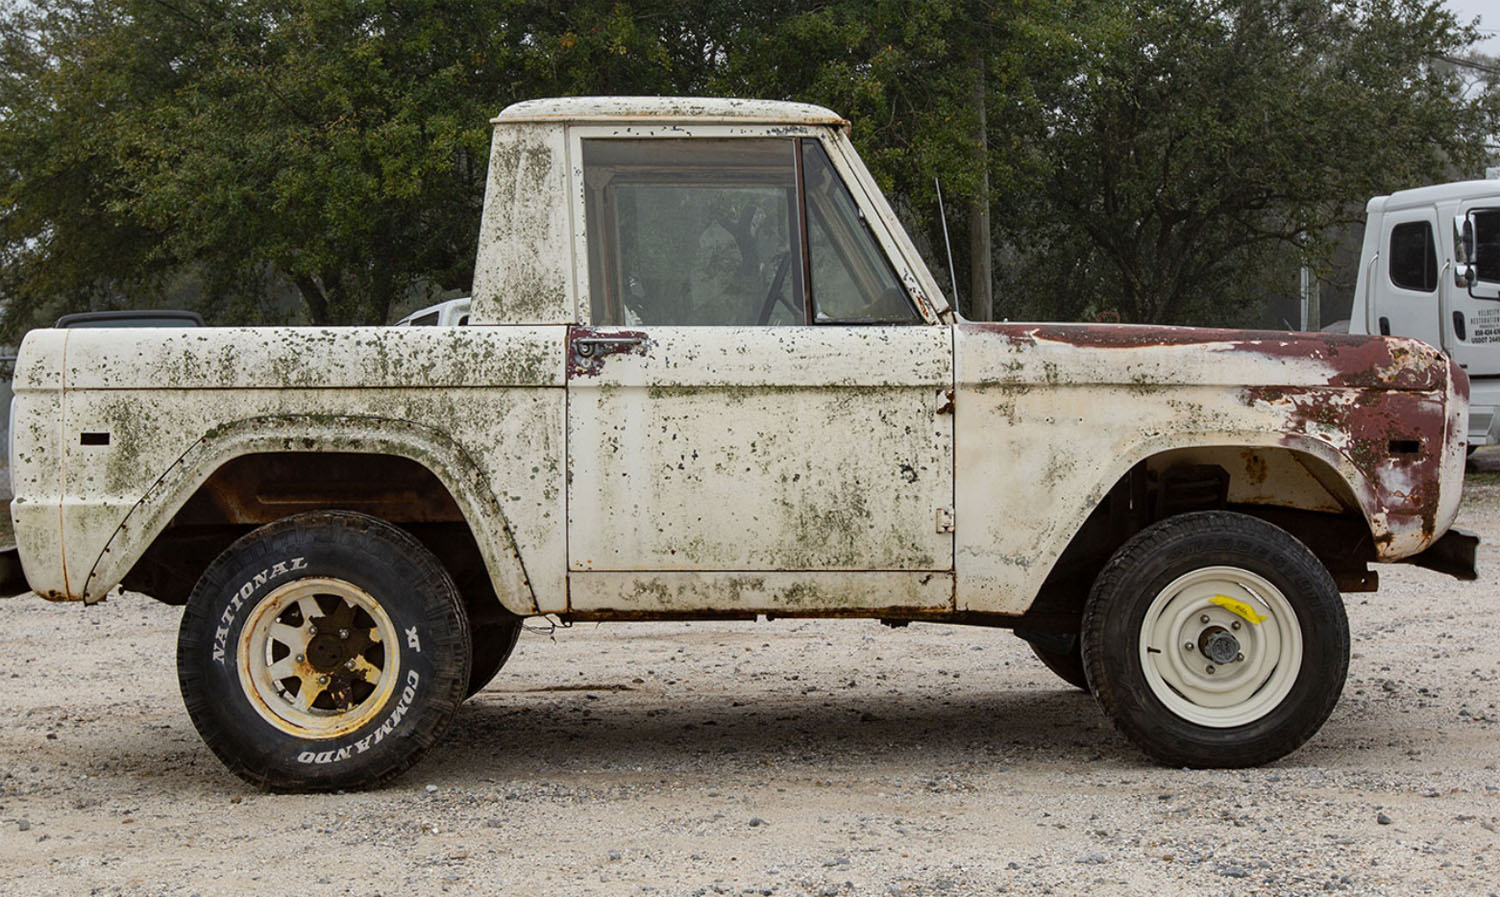 1966 Ford Bronco U13 Roadster Is Very Rare